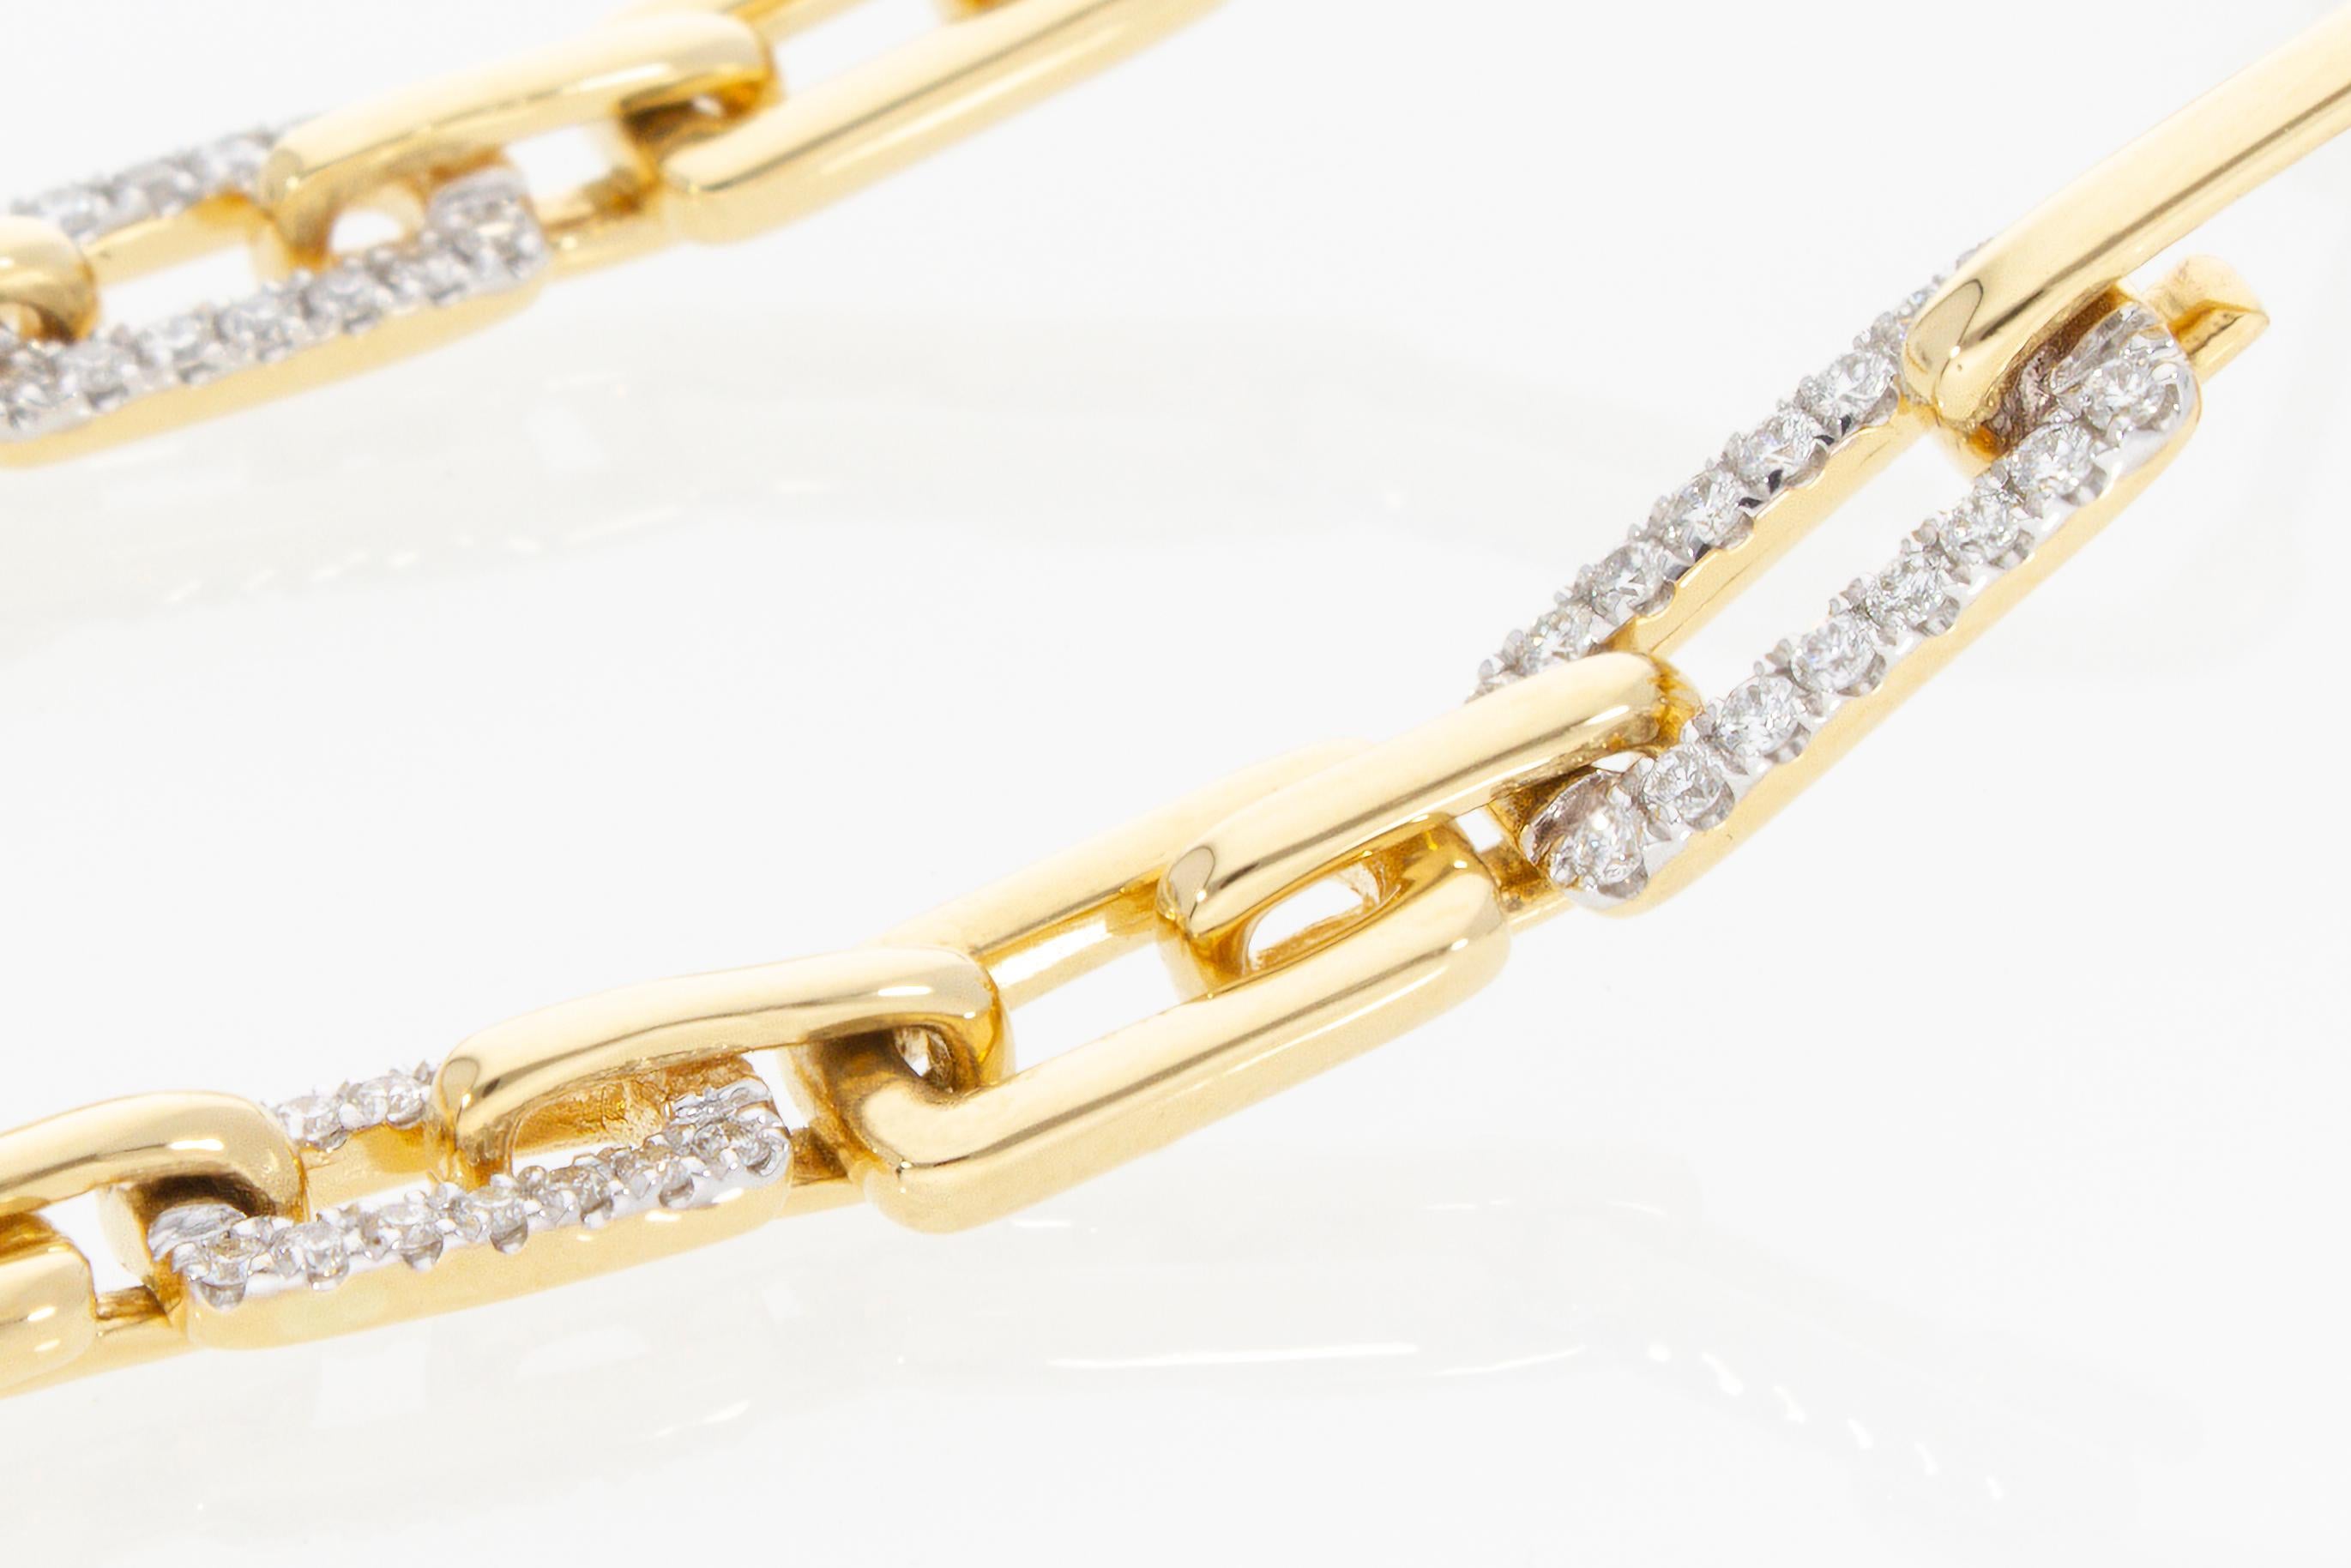 Brilliant Cut Diamonds Ct 0.35 Pendant Earrings with Rectangular Links 18k Gold Made in Italy For Sale